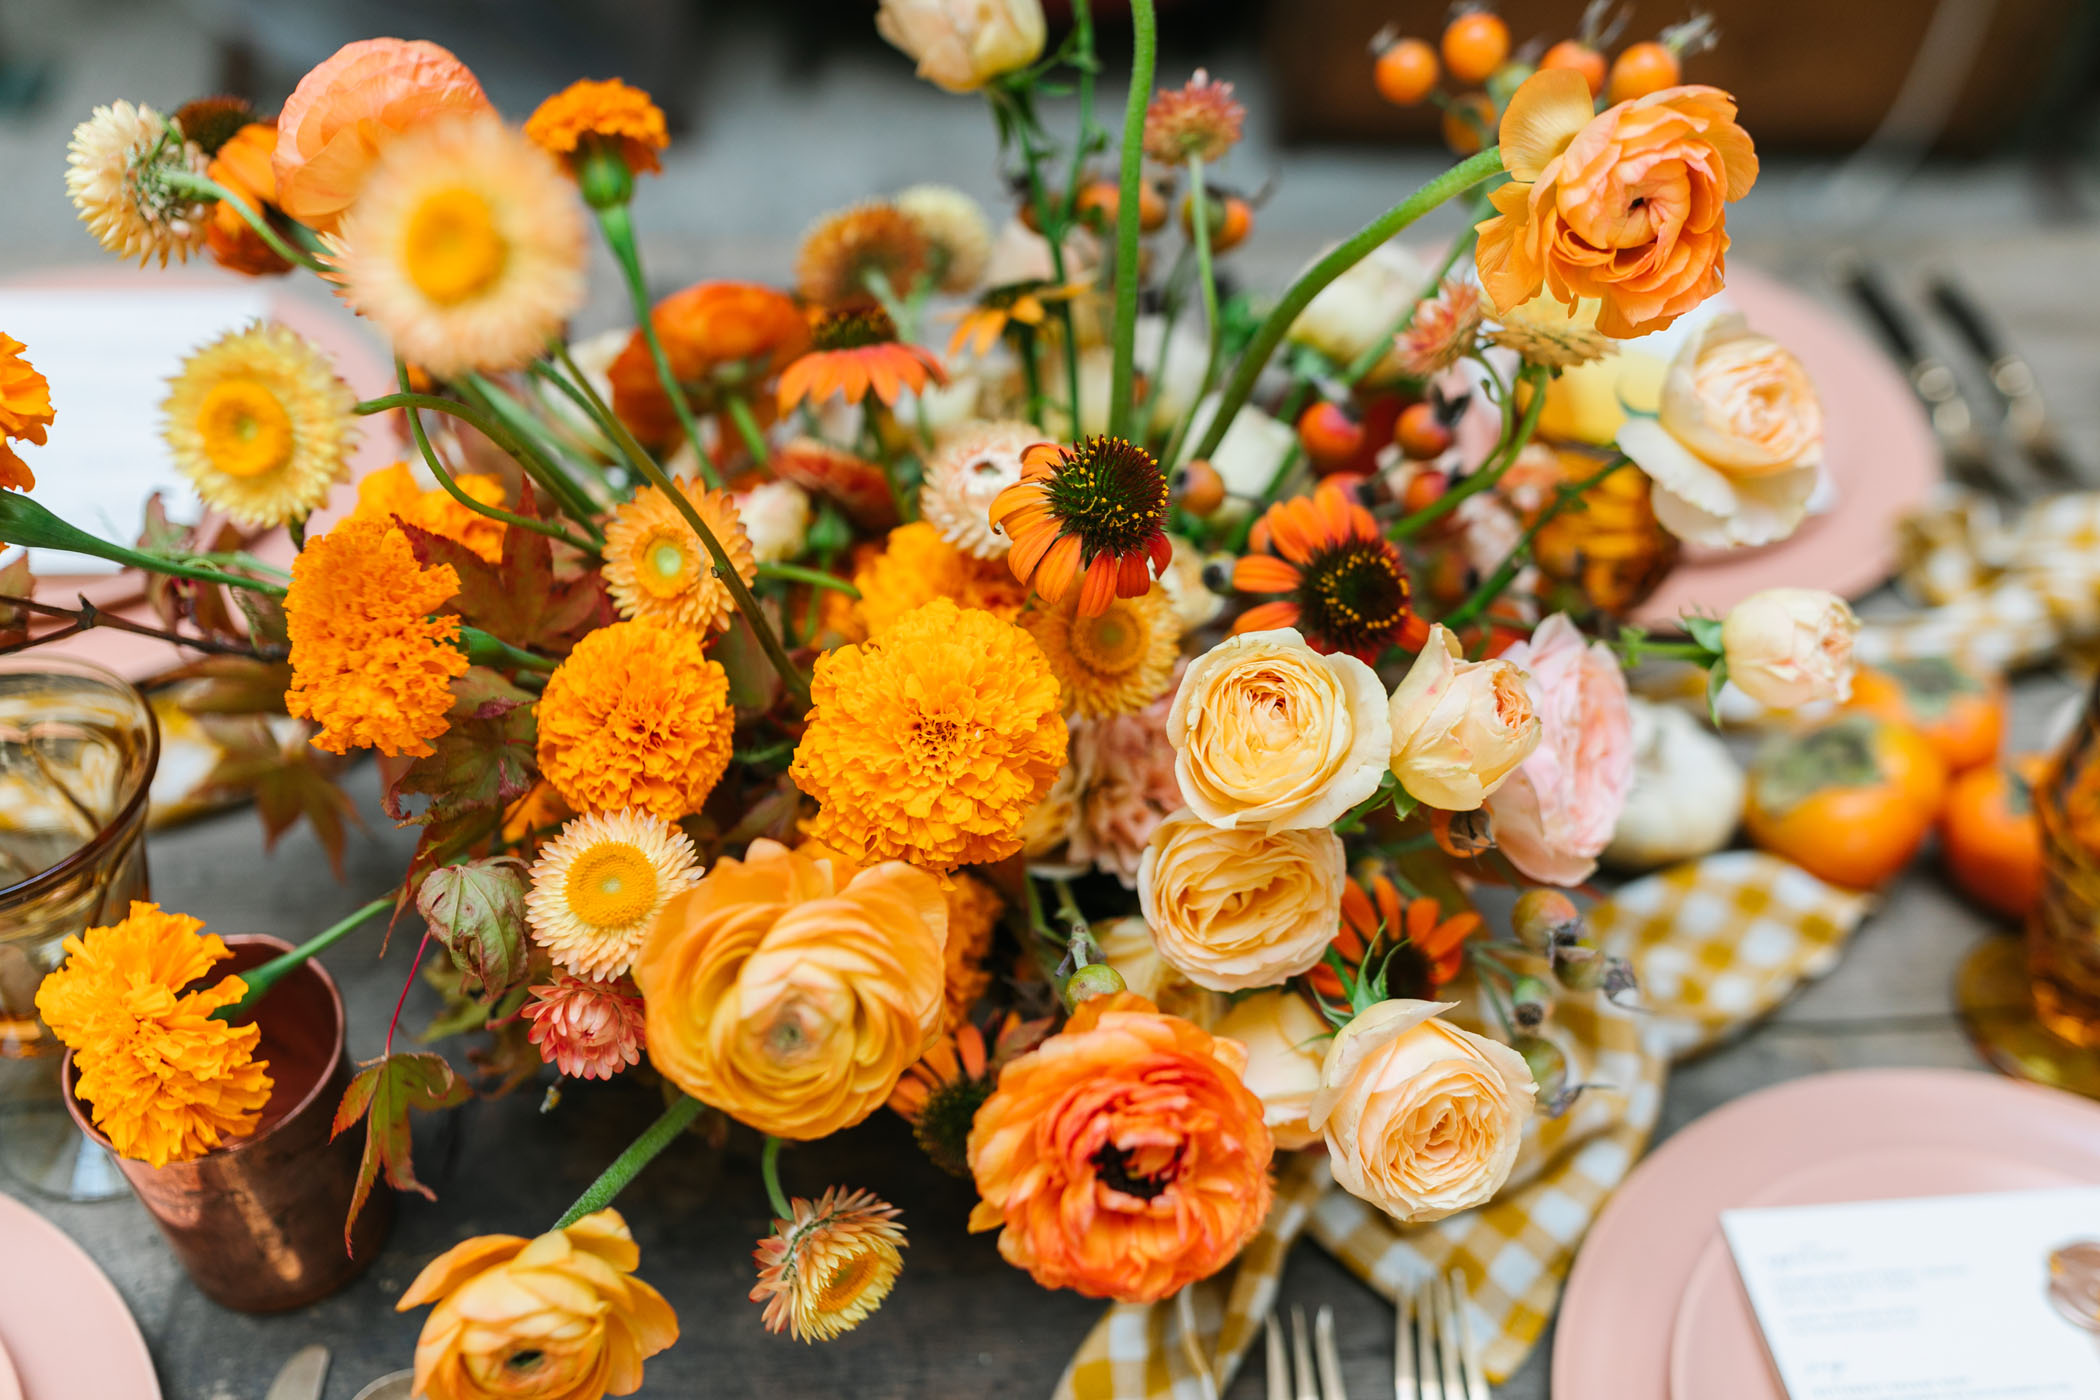 A Gorgeous Fall Persimmon Inspired Feast